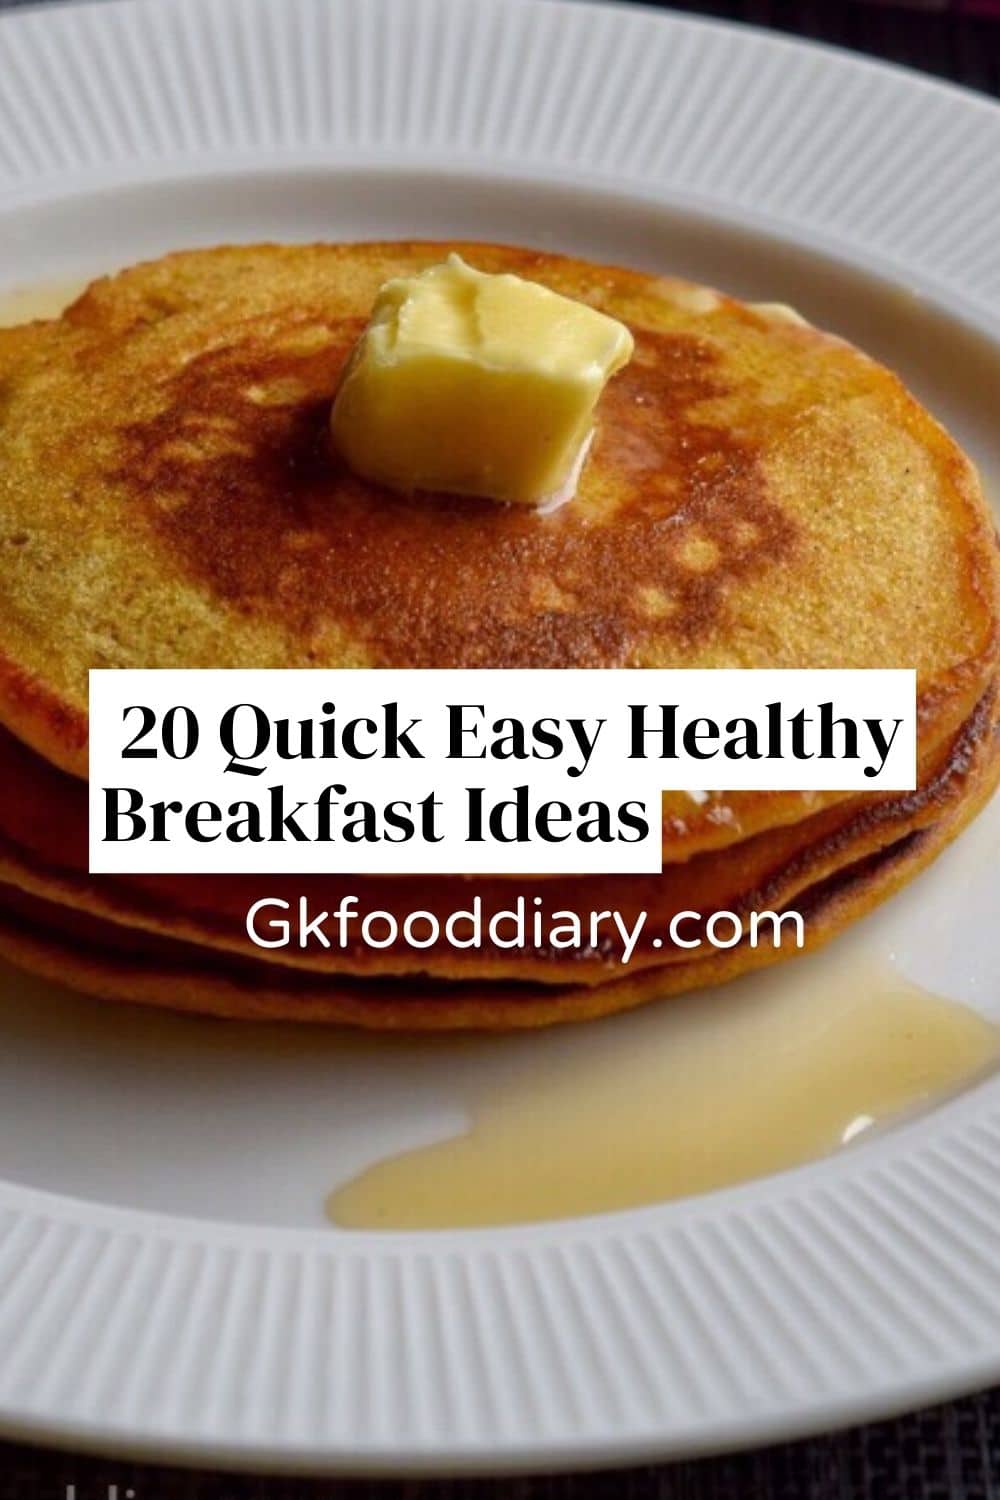 20 Good Breakfast Ideas for Toddlers and Kids